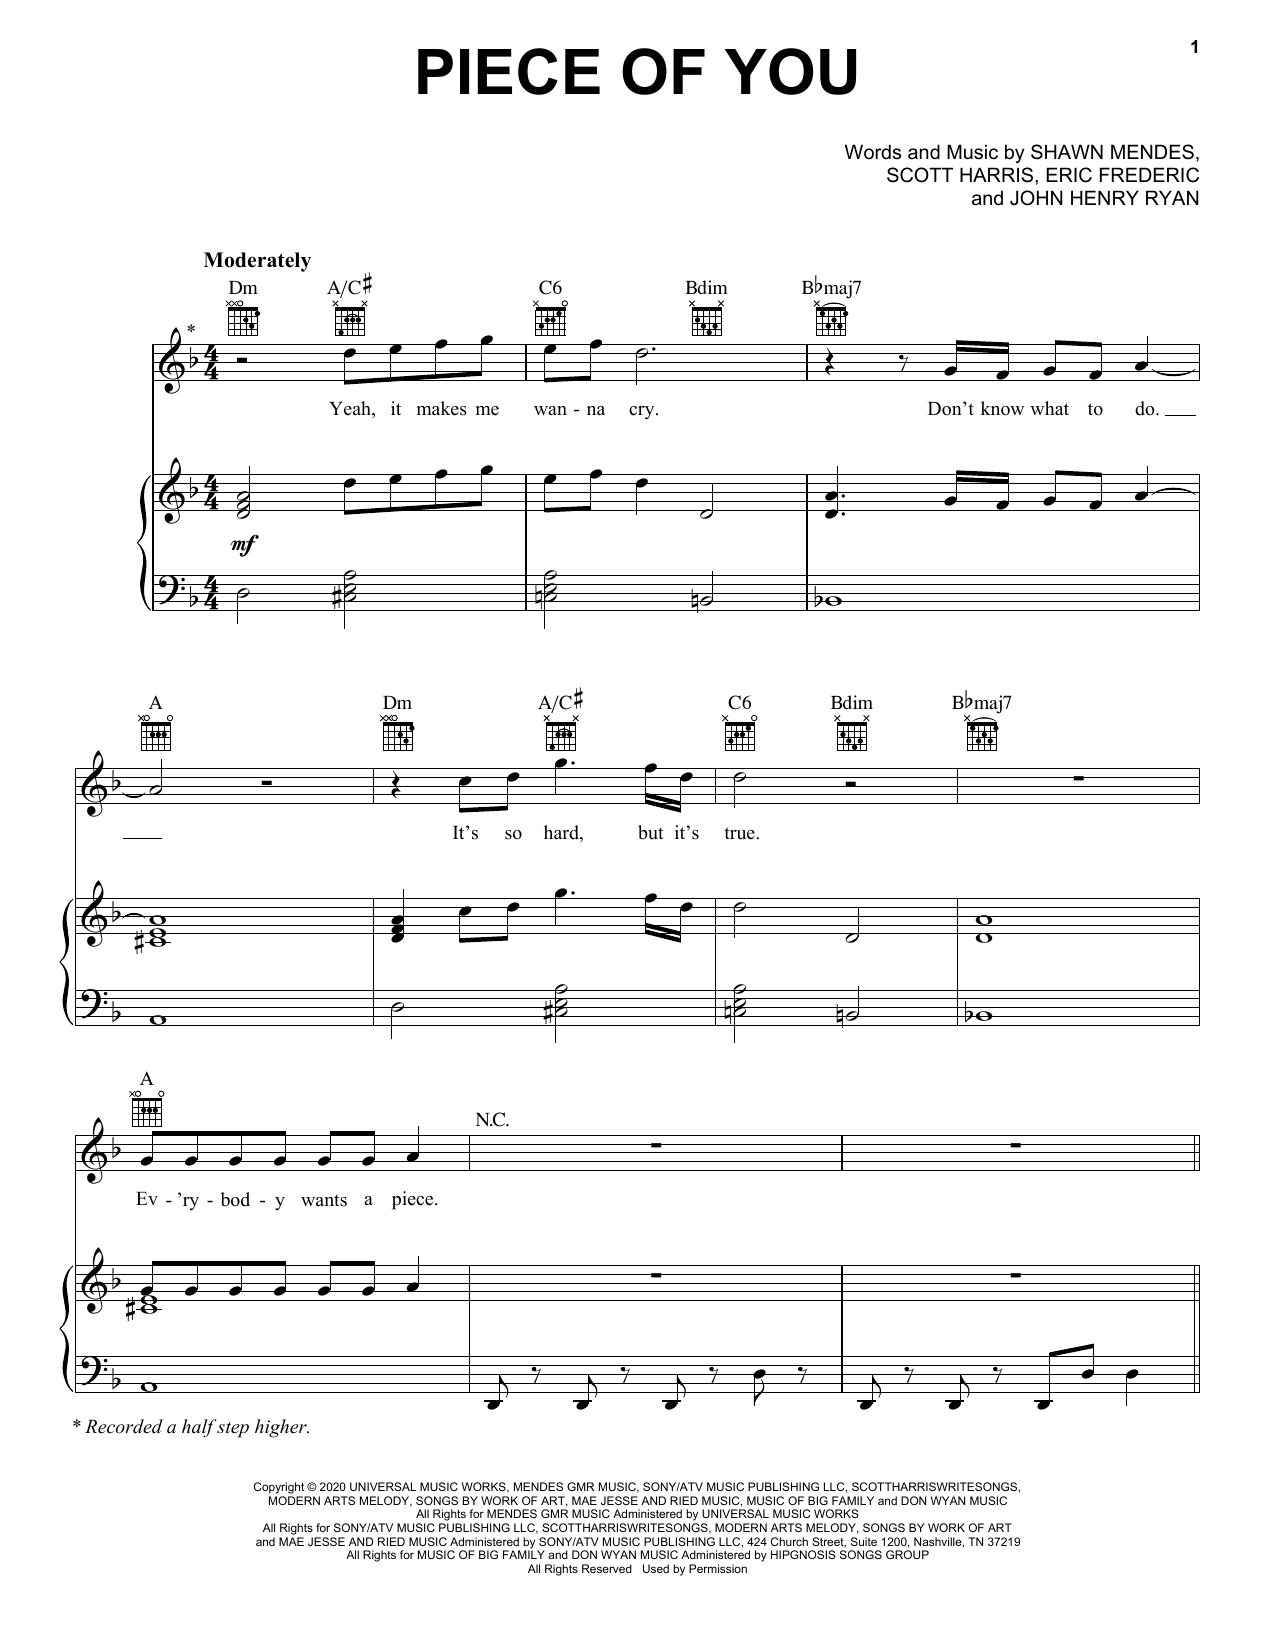 Download Shawn Mendes Piece Of You Sheet Music